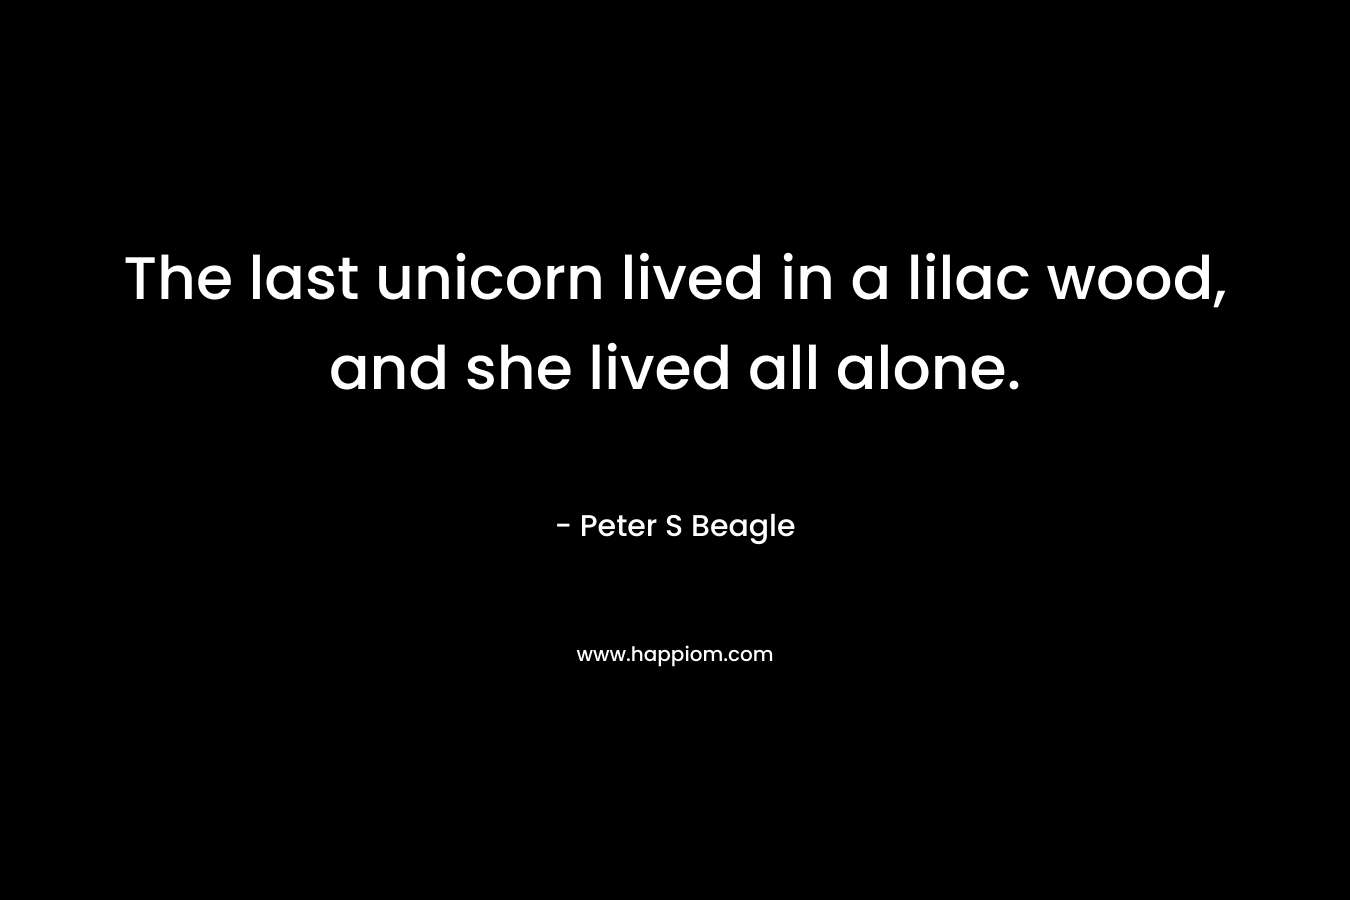 The last unicorn lived in a lilac wood, and she lived all alone.